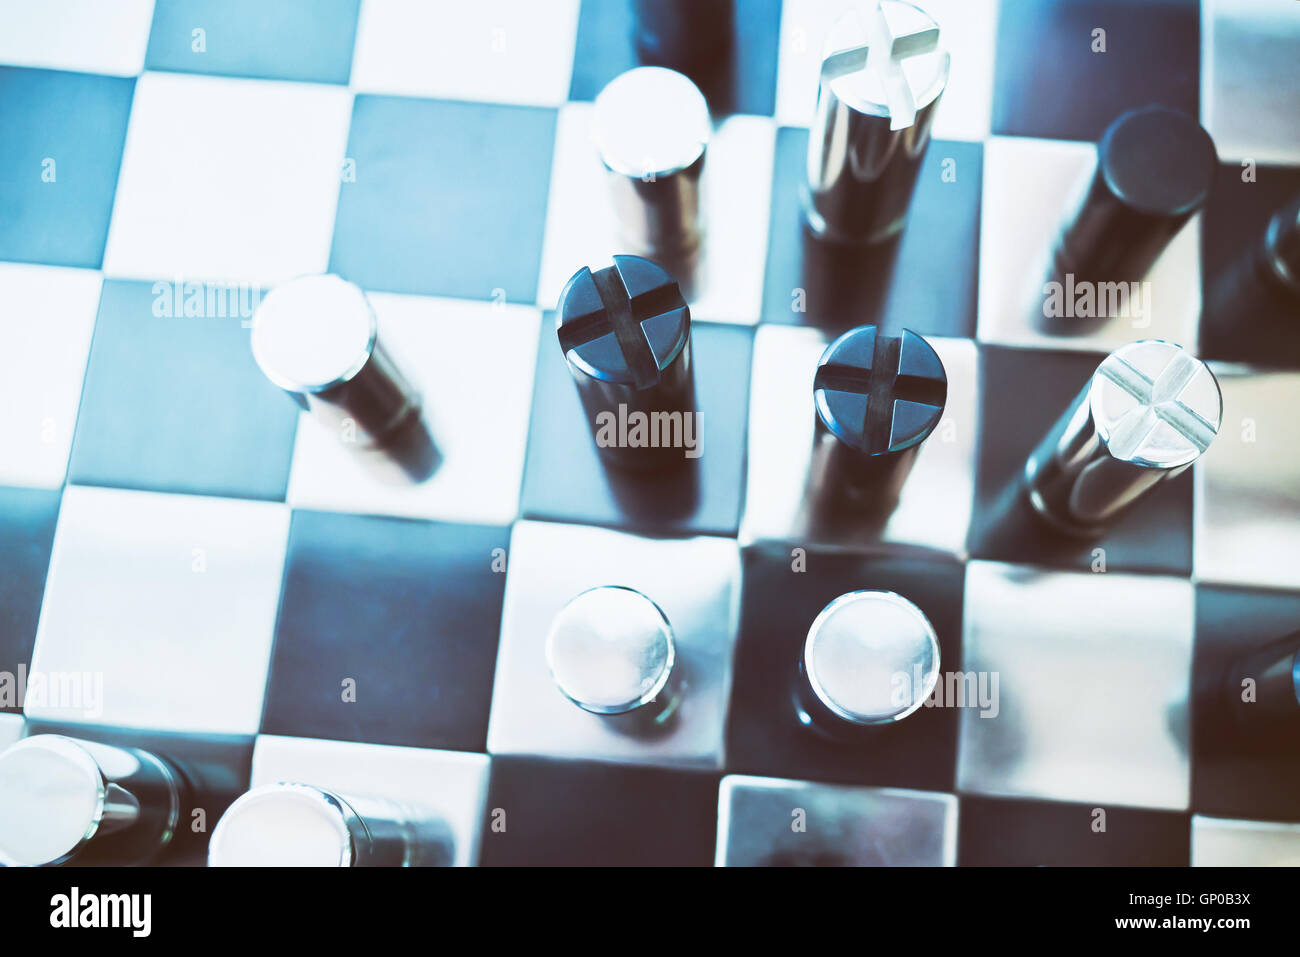 Black & chrome metallic chess on board. Business concept: Market competition and usurp business opportunities. Stock Photo